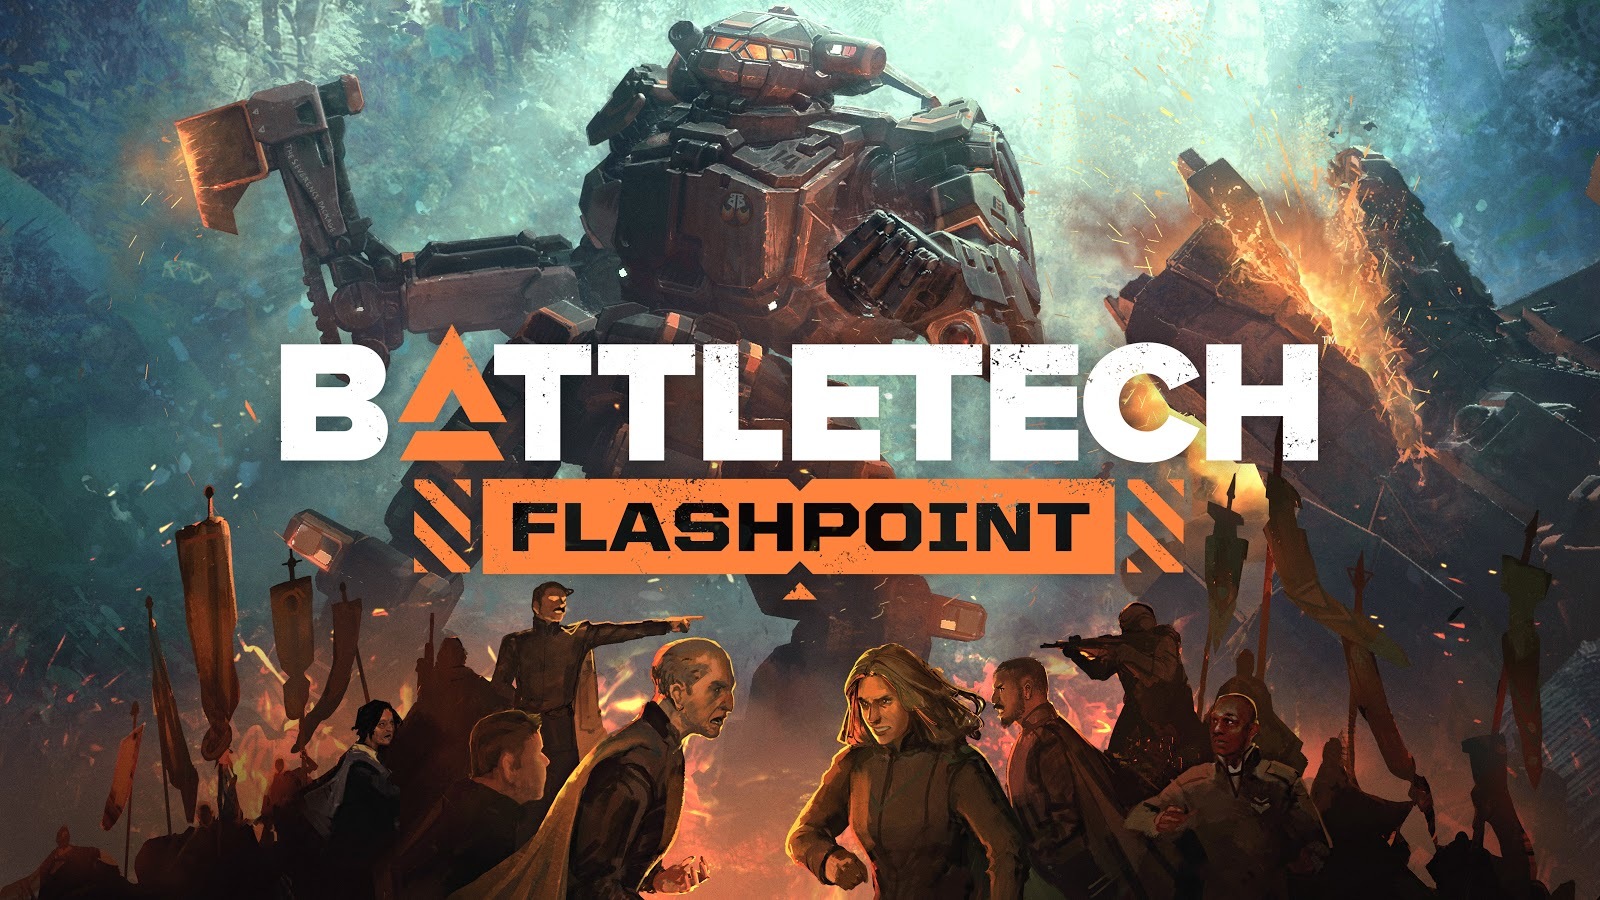 Jan 31 2019 Live Battletech 1 4 0 Release Notes The One